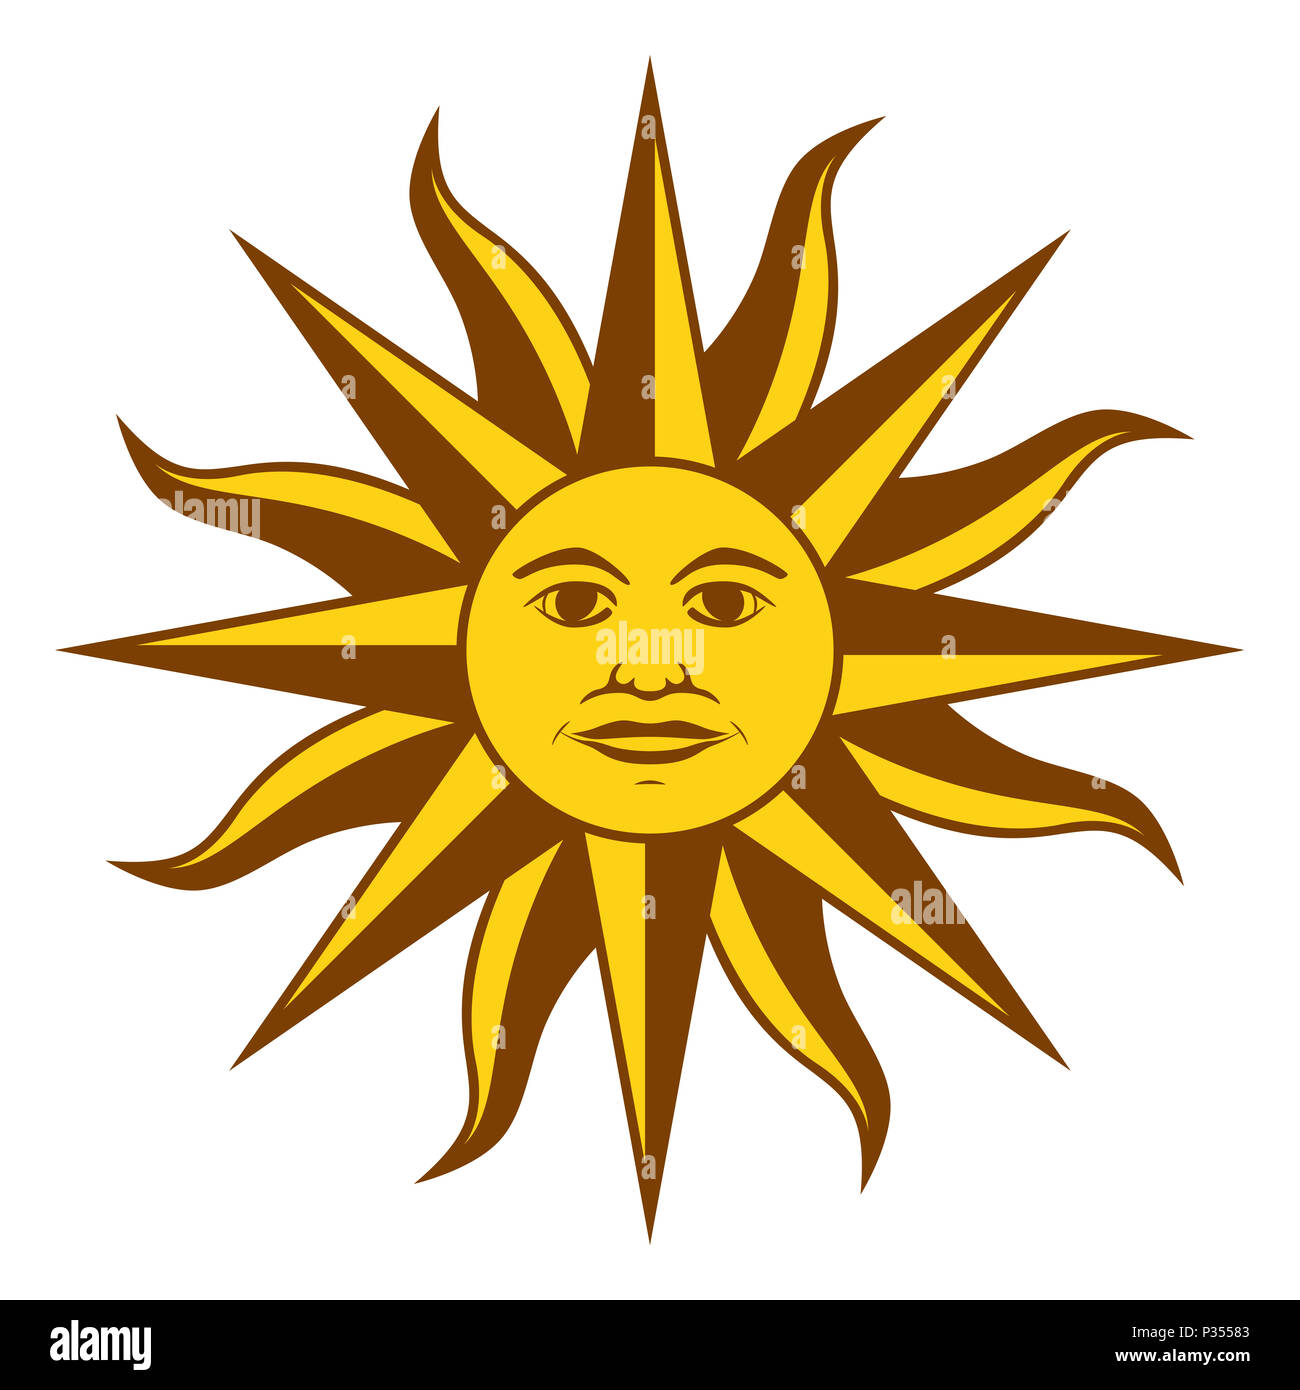 Sun of May, Spanish Sol de Mayo, a national emblem of Uruguay on the country flag. Radiant golden yellow sun with face and rays. Illustration. Stock Photo